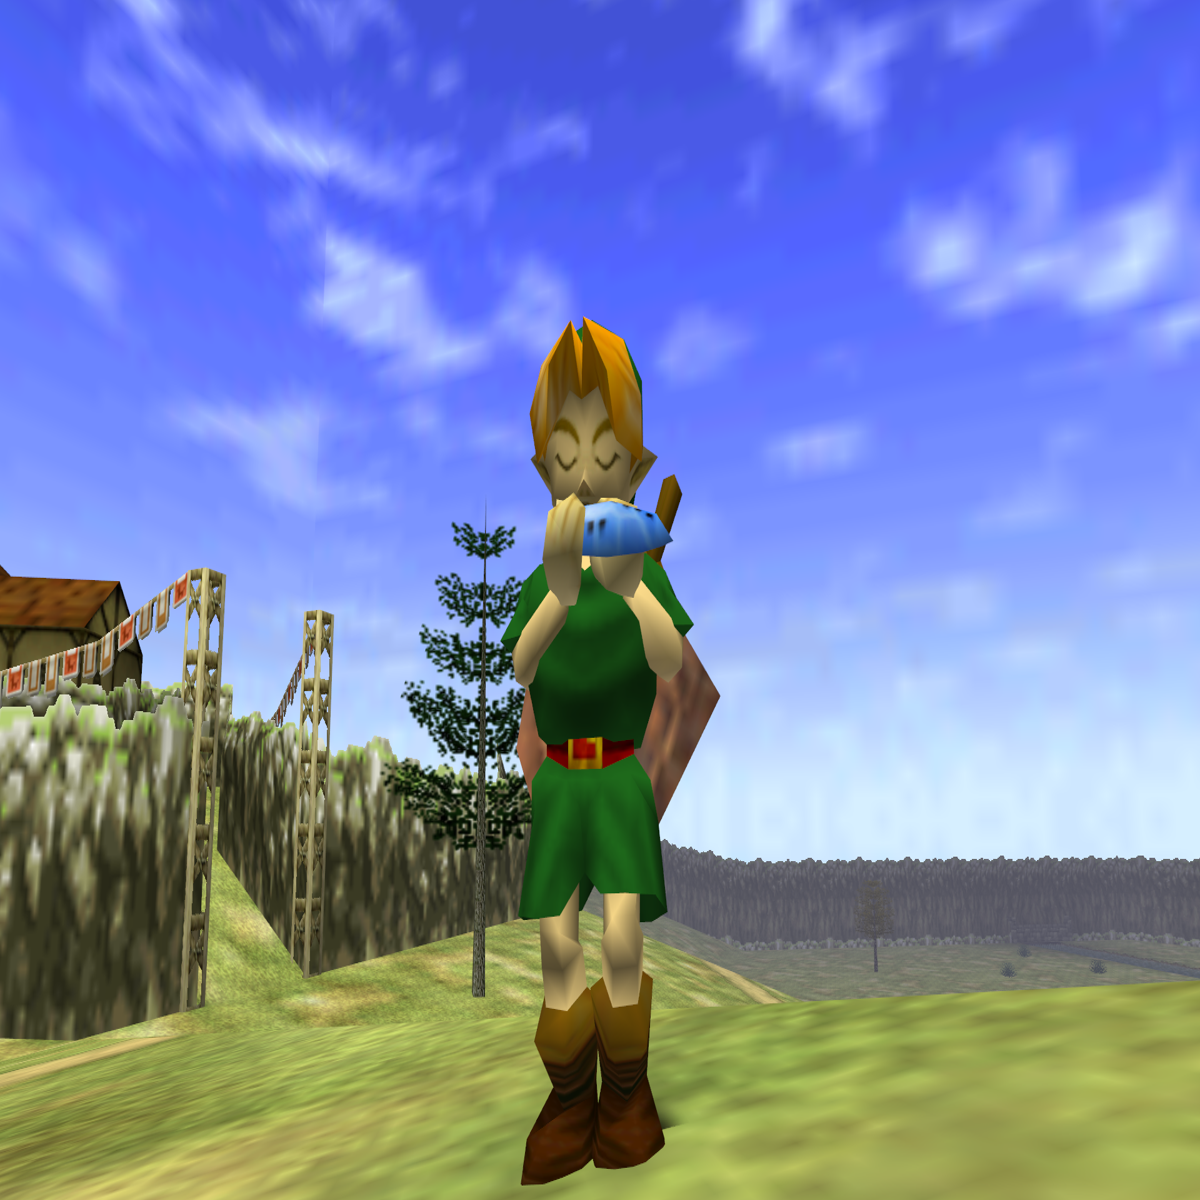 Zelda: Ocarina Of Time Inducted Into Video Game Hall Of Fame